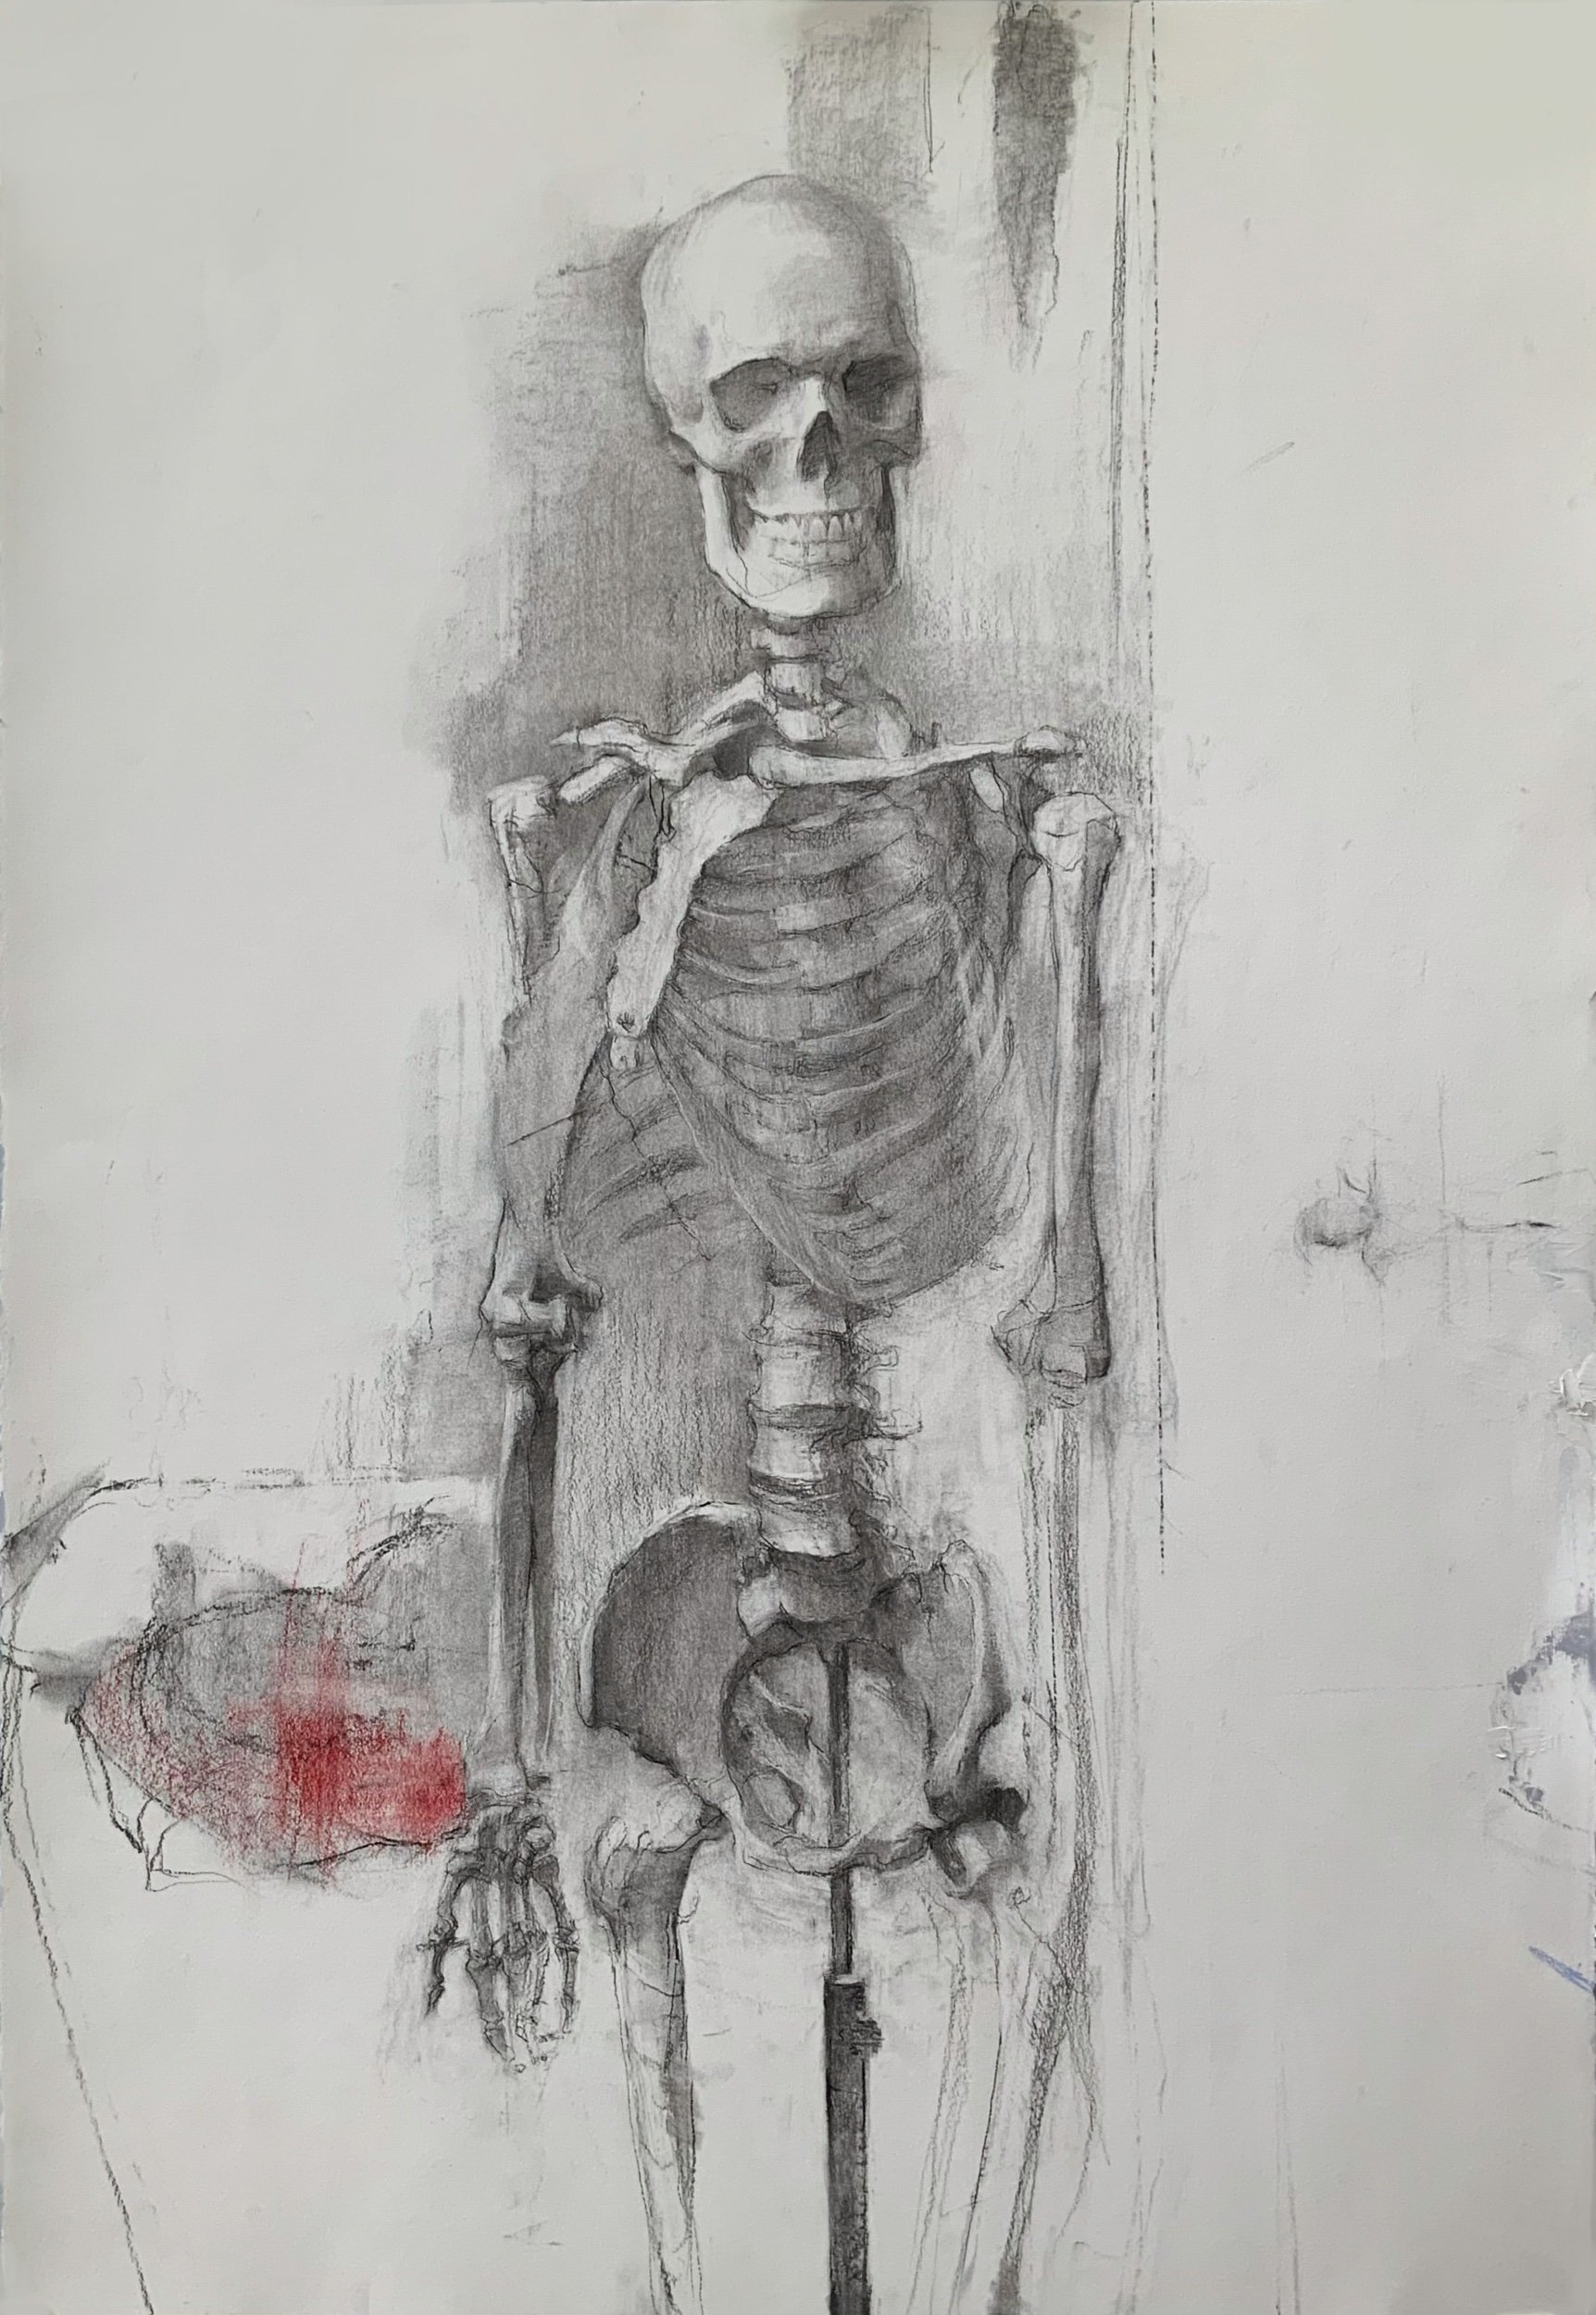   Skeleton 1   2021  44” x 30”  charcoal, pastel, and oil on paper 